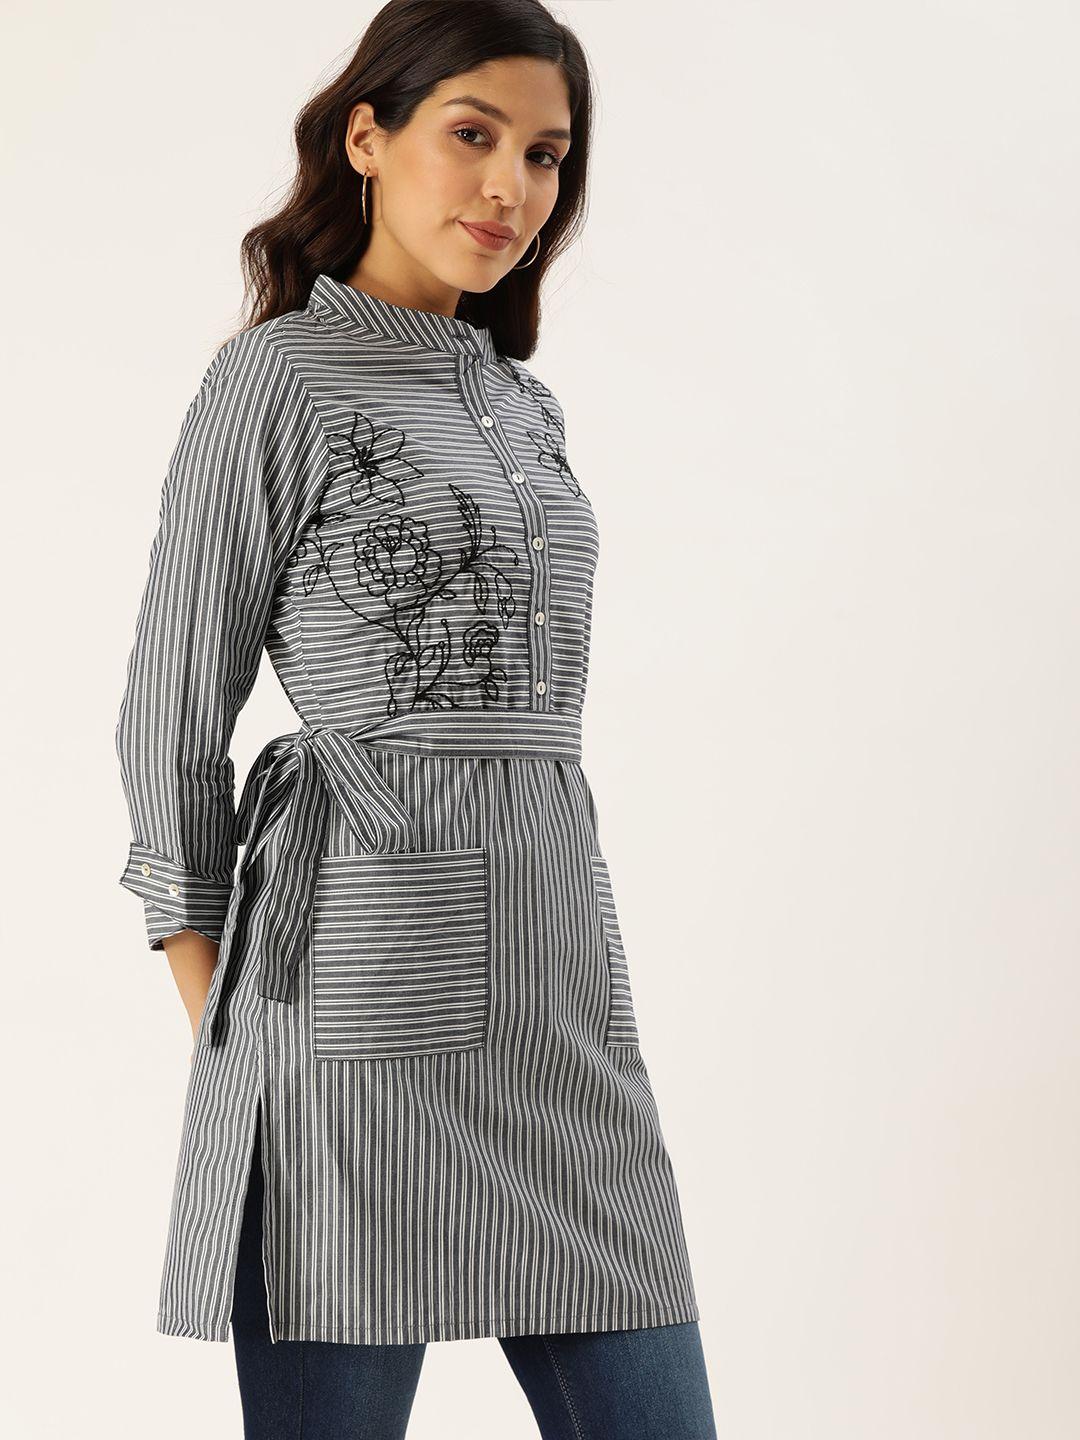 and-women's-navy-blue-&-white-striped-tunic